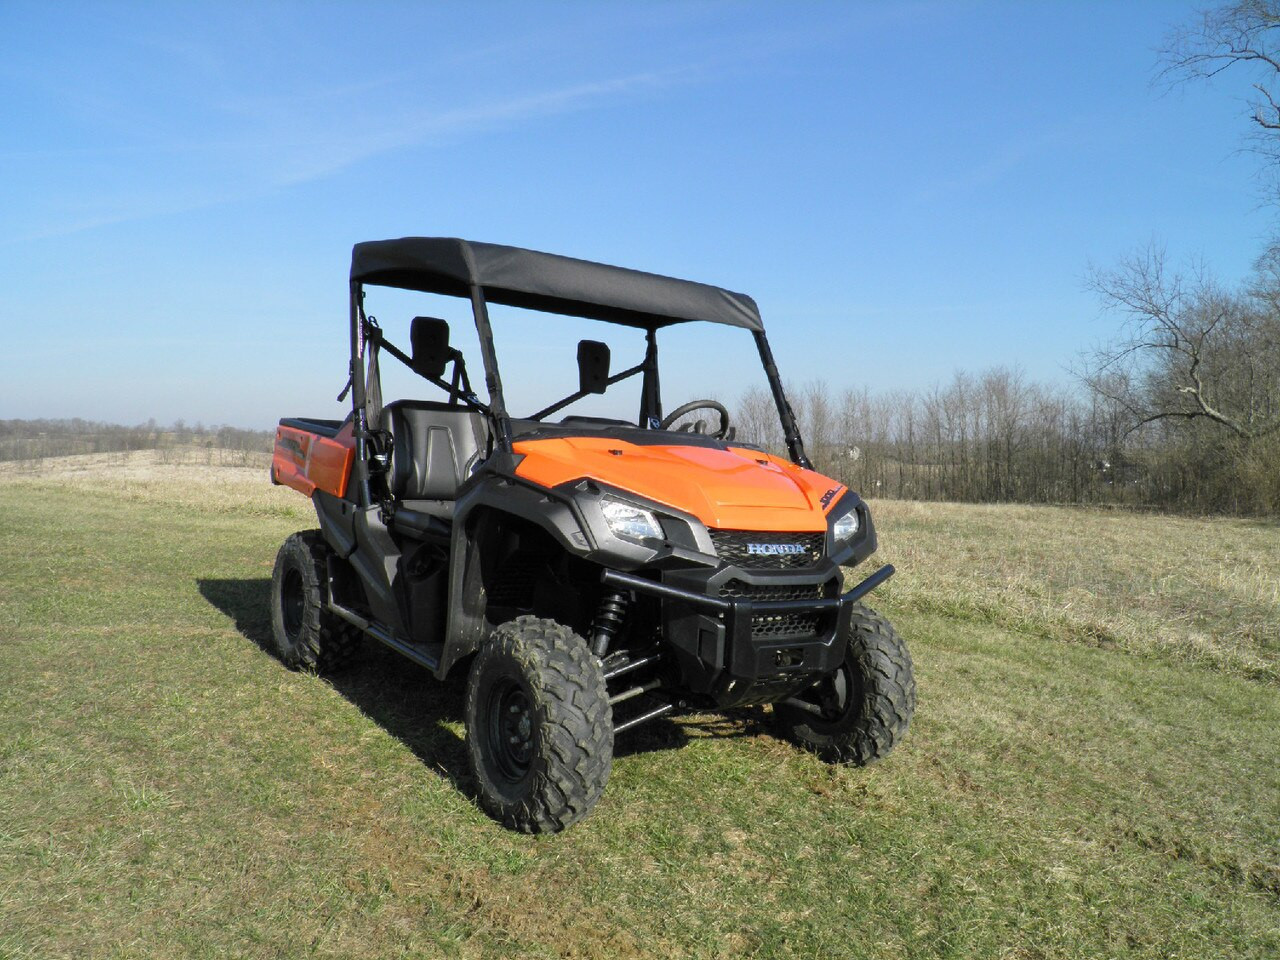 Honda Pioneer 1000 Soft Top front angle view